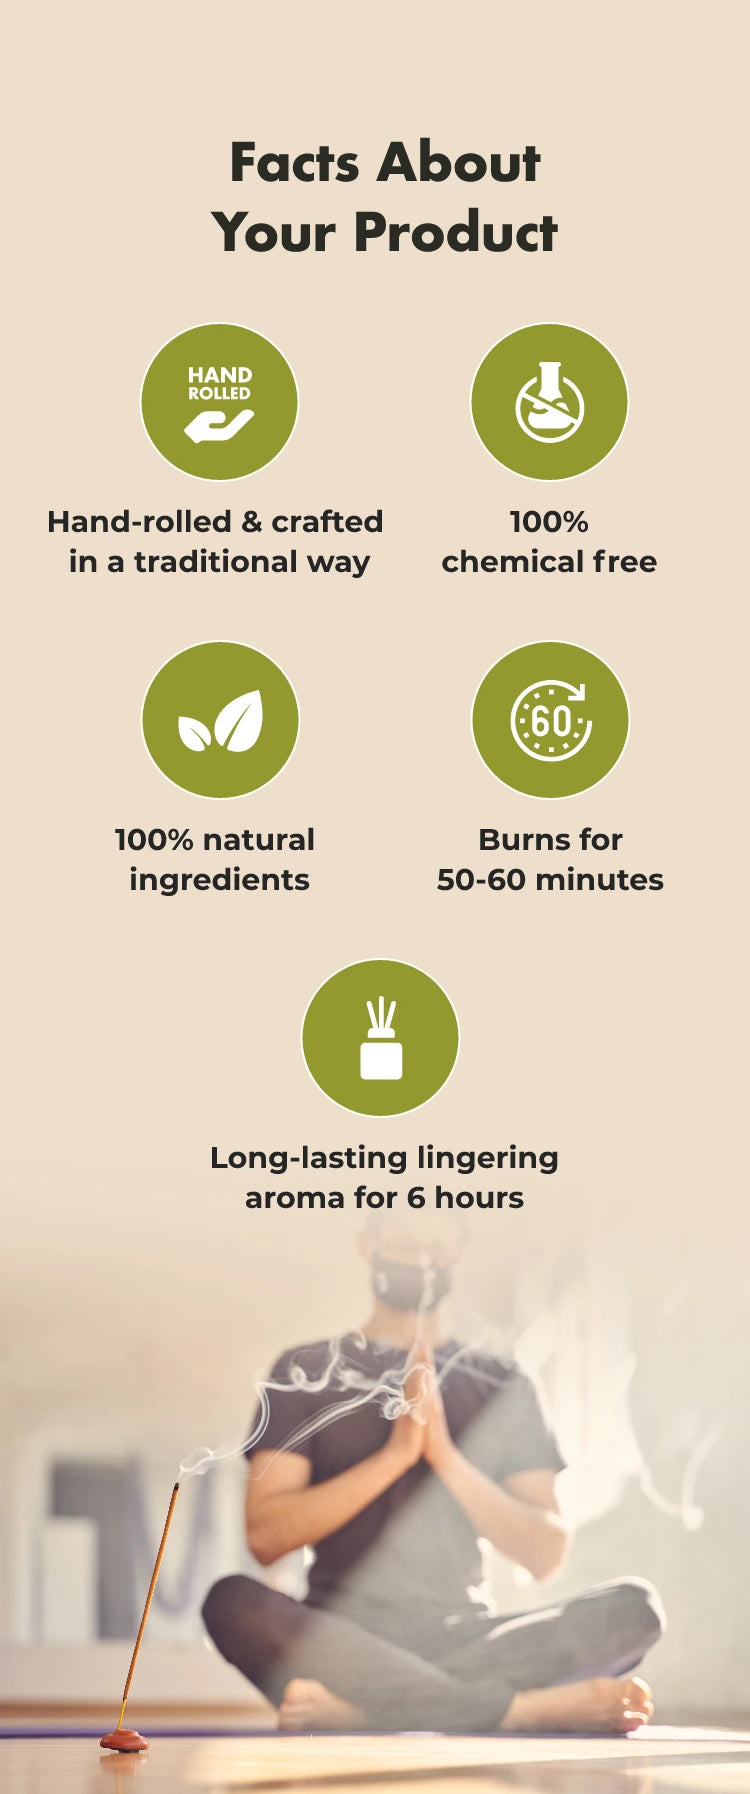 Facts About Your Product
HAND ROLLED
Hand-rolled & crafted in a traditional way
100% chemical free
100% natural ingredients
€60
Burns for 50-60 minutes
Long-lasting lingering aroma for 6 hours